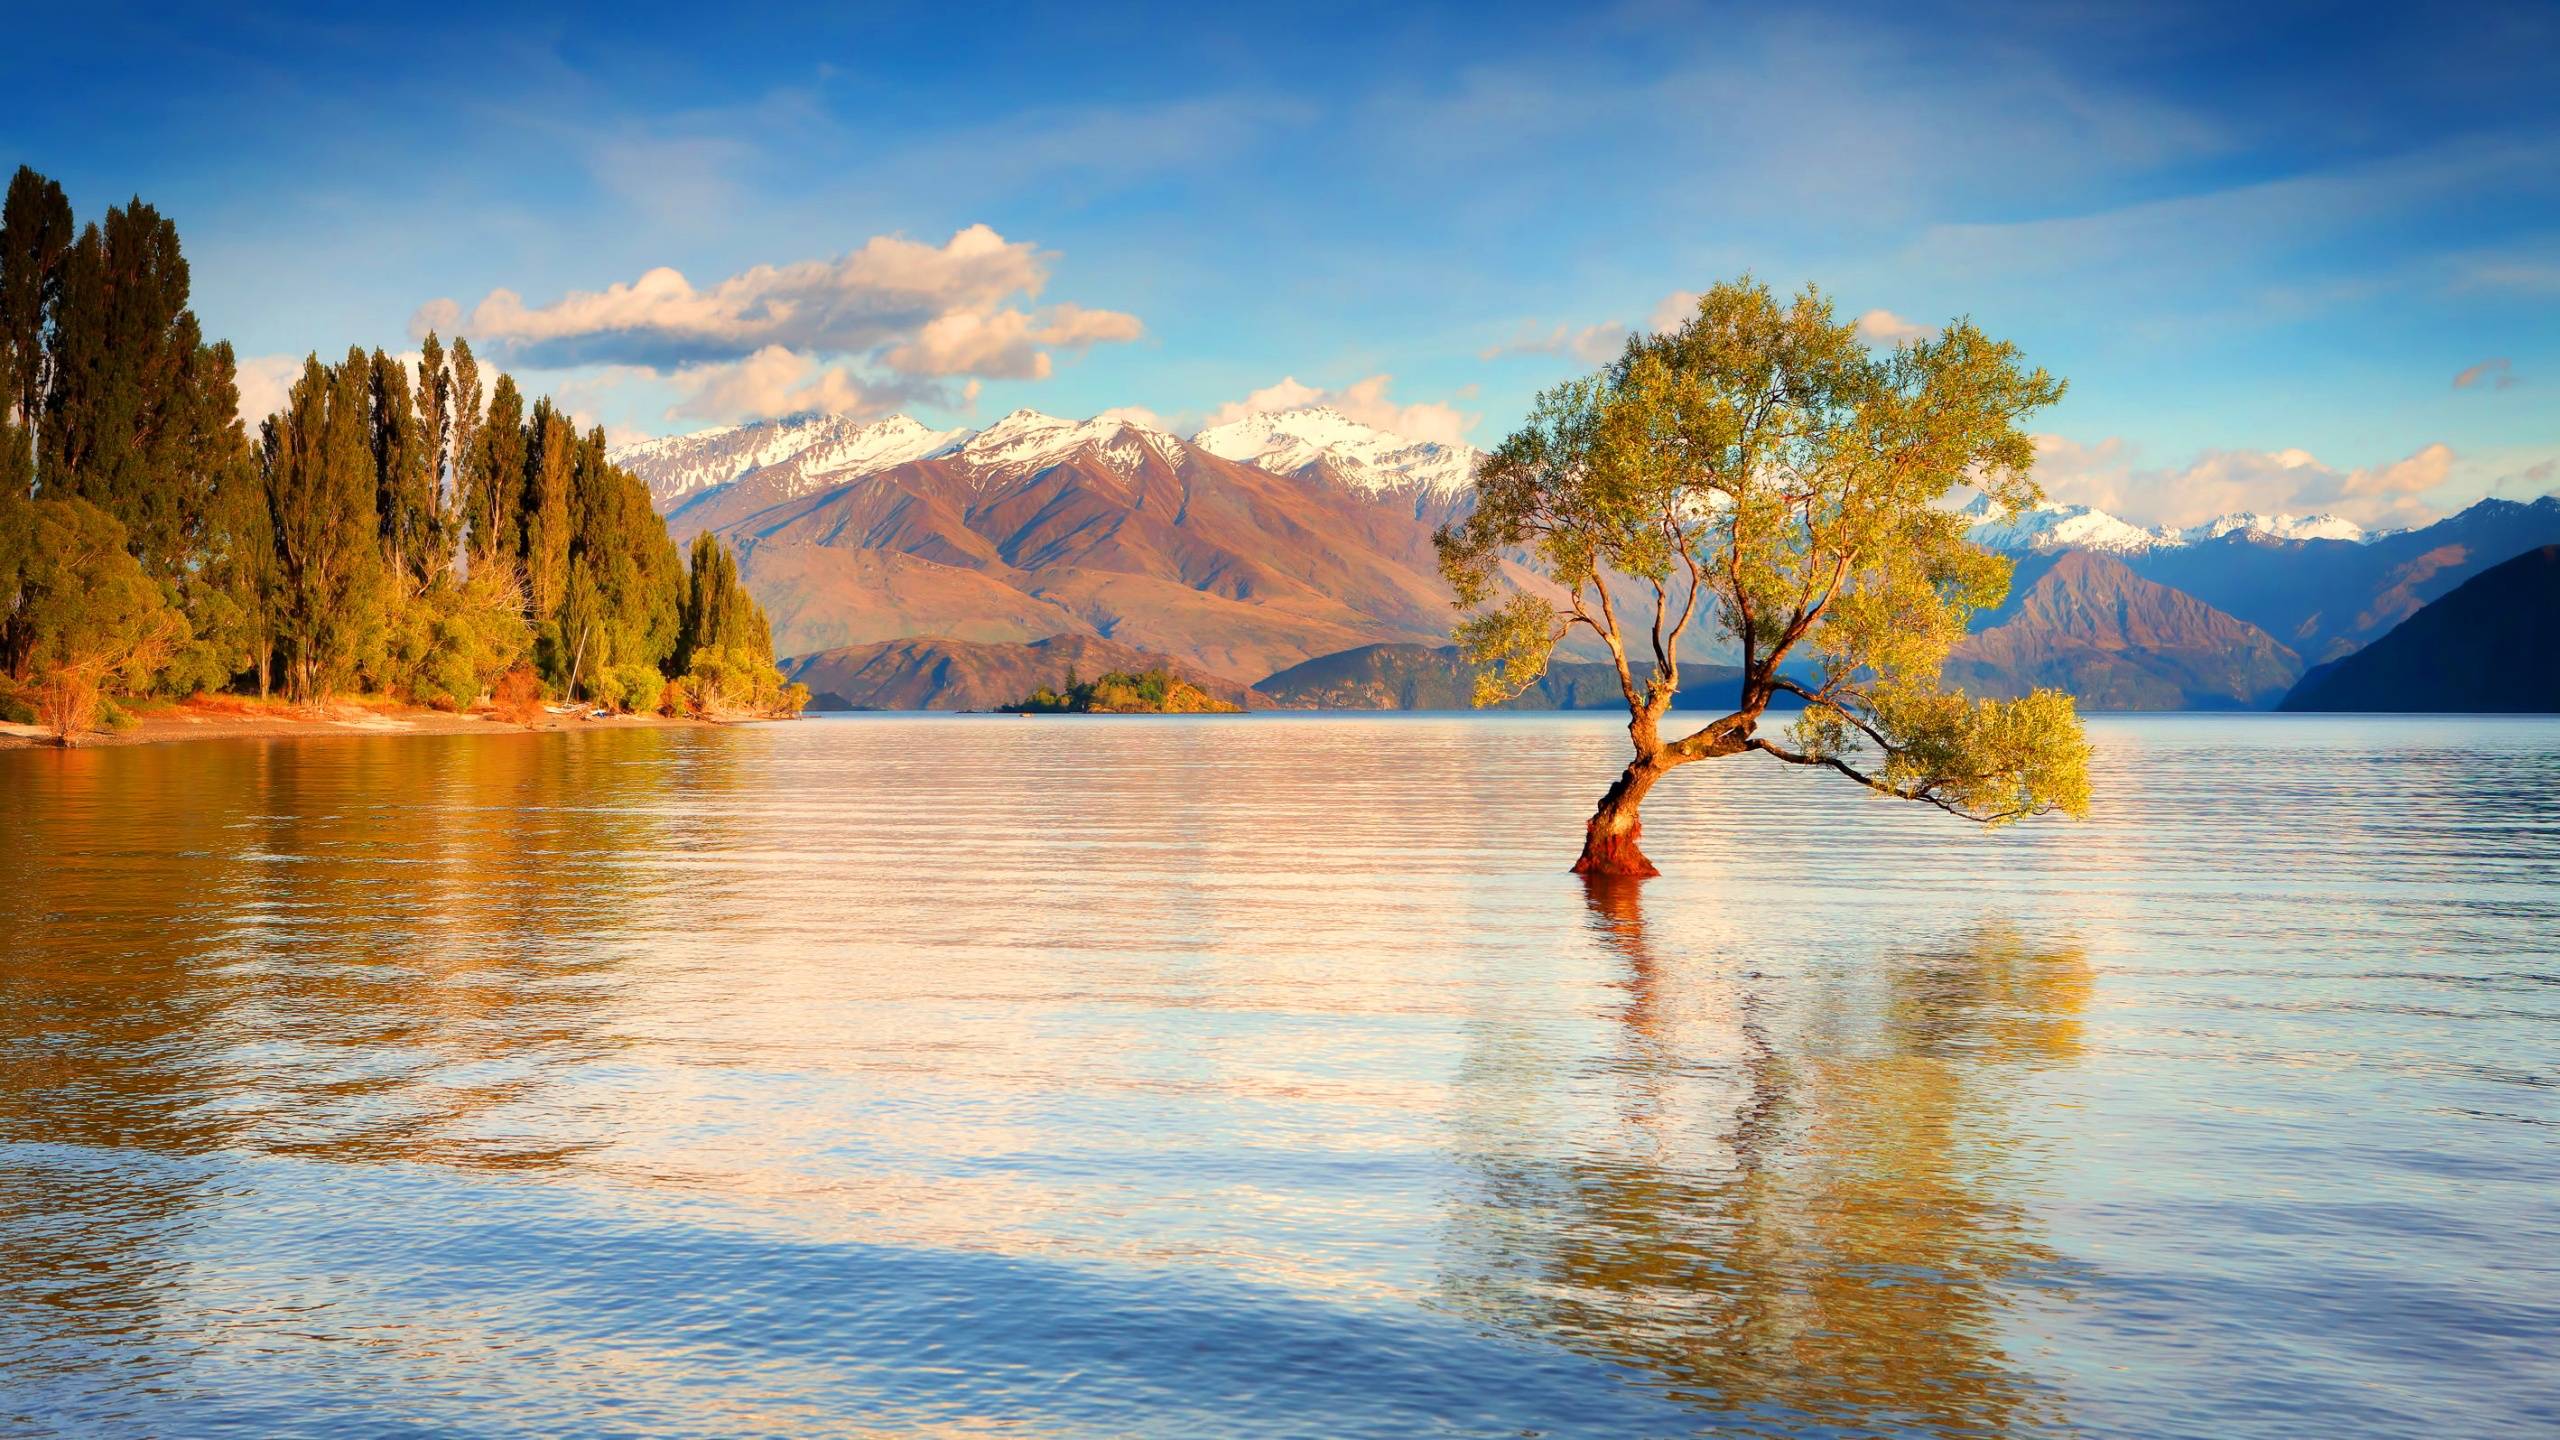 Full HD New Zealand Wallpaper For Free Download: The Land